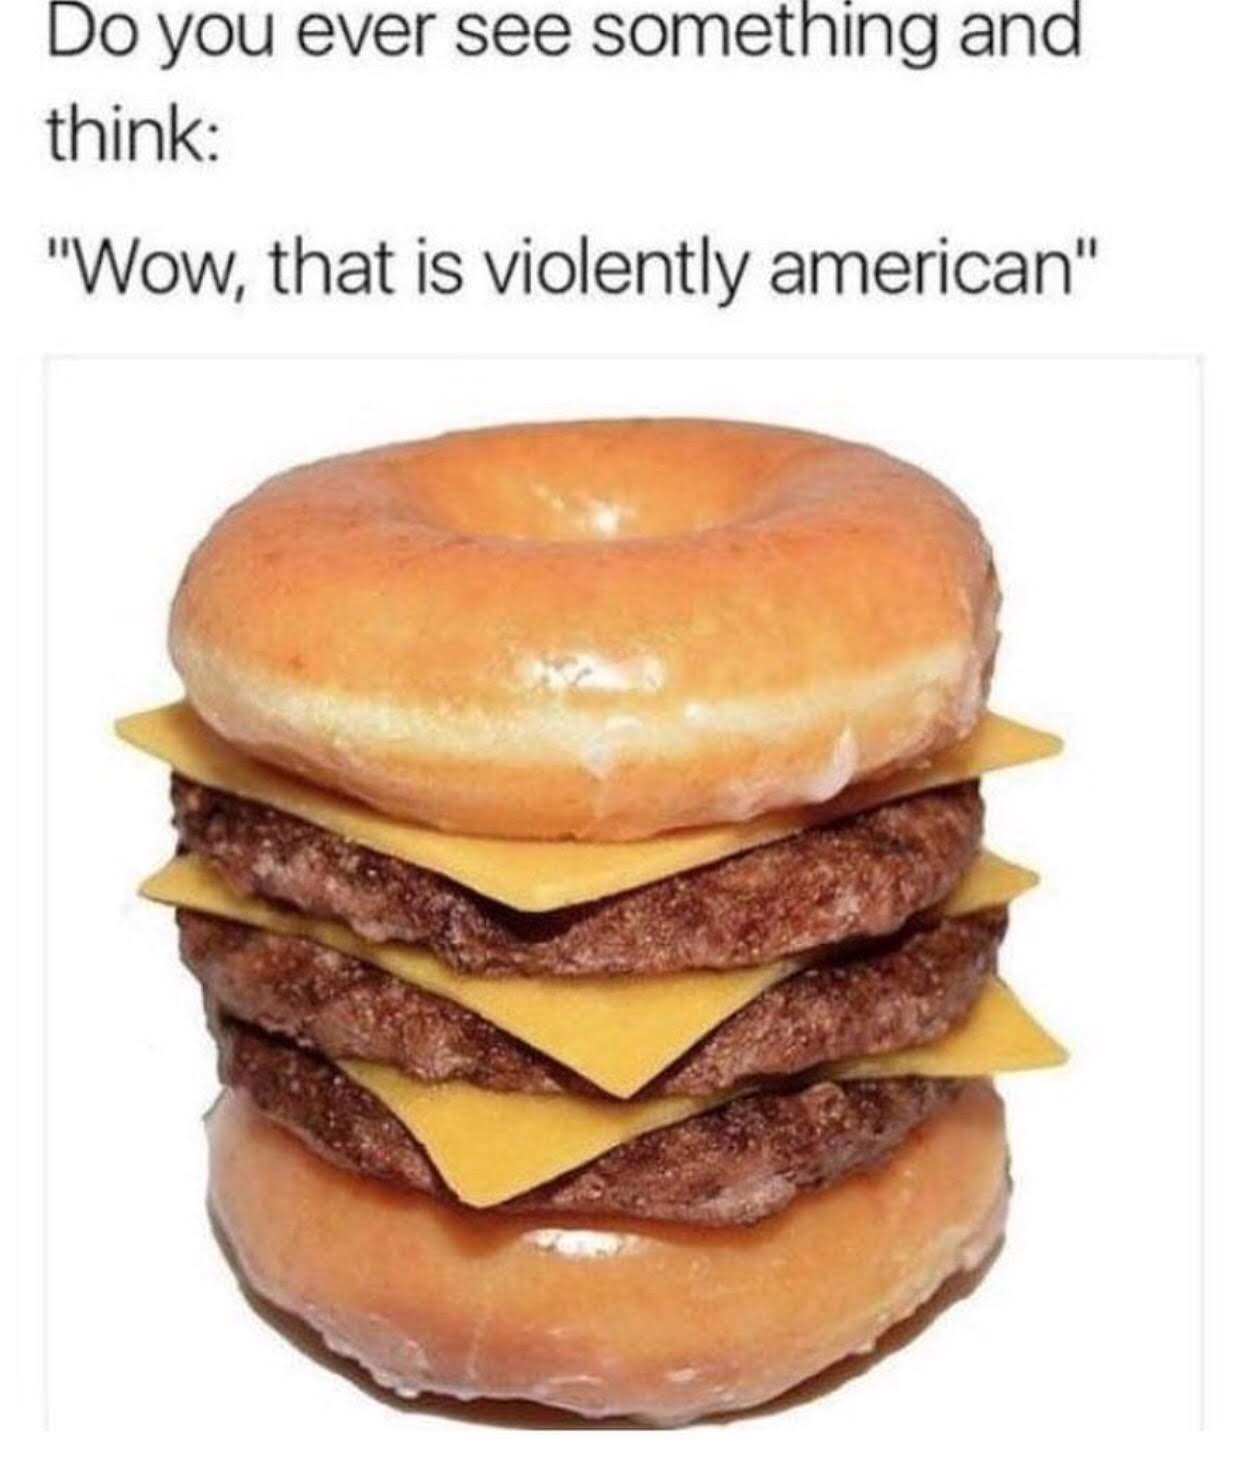 violently american - Do you ever see something and think "Wow, that is violently american"